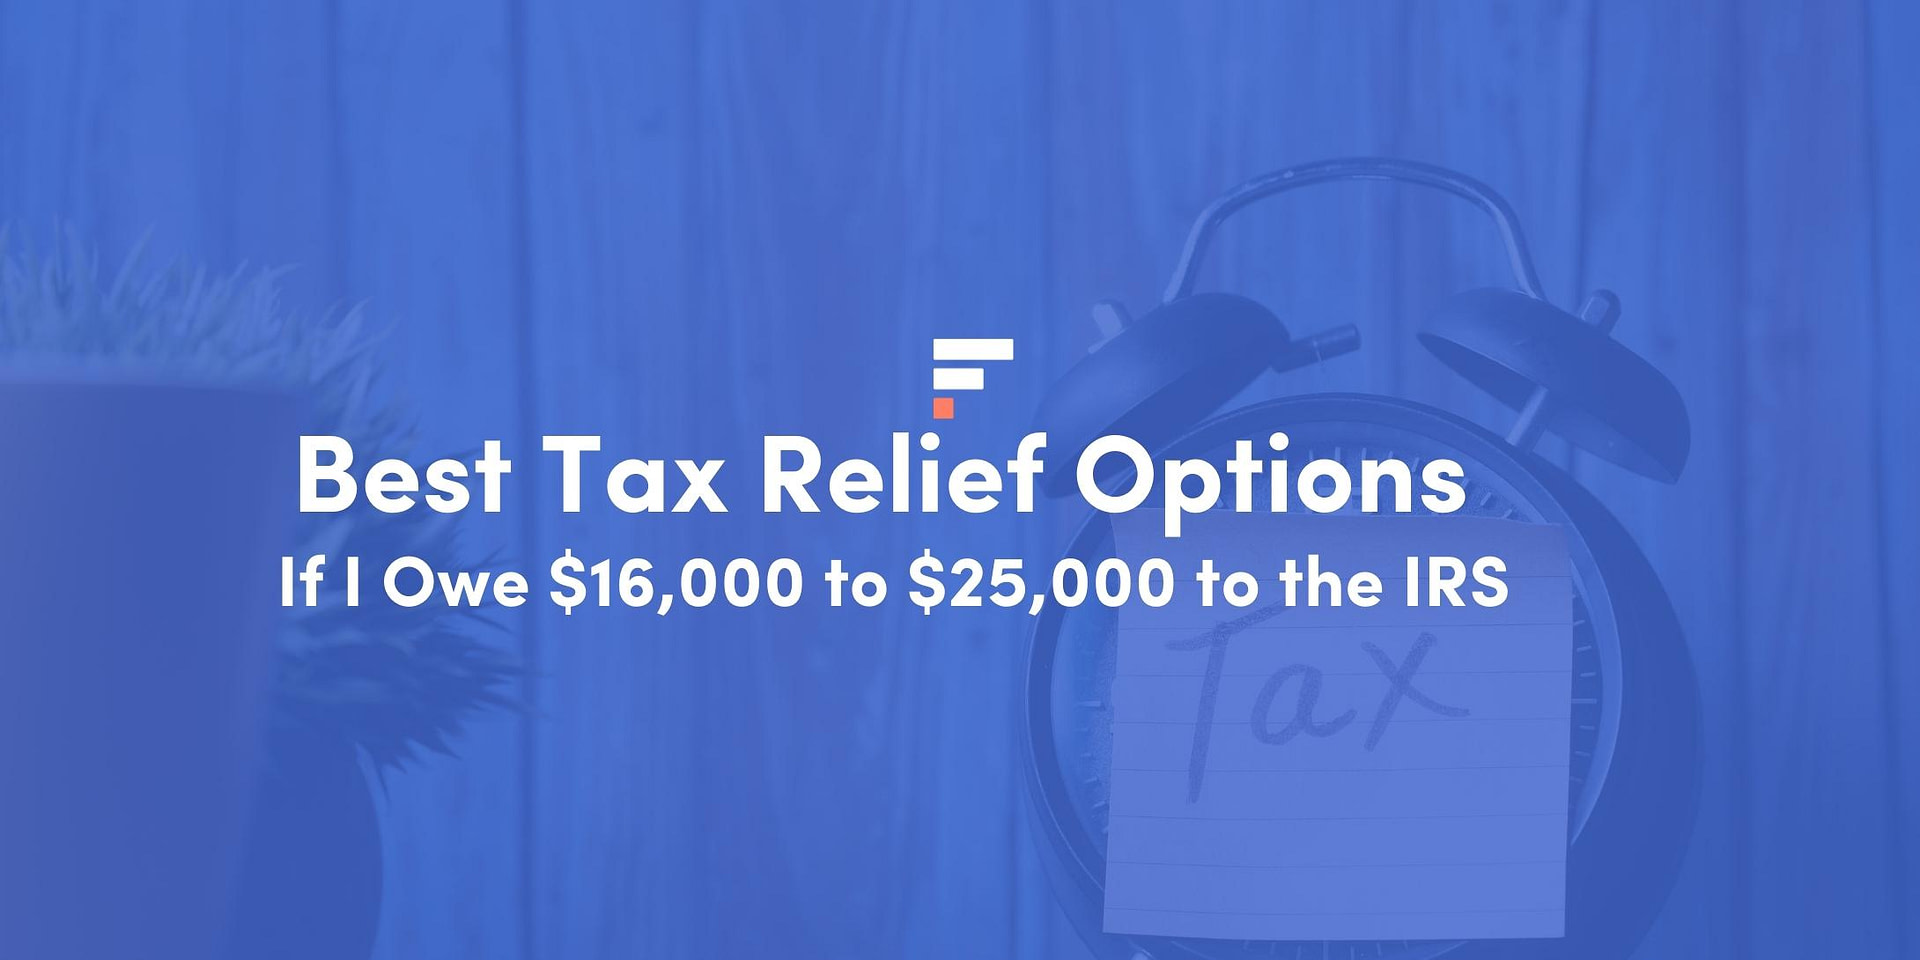 best-tax-relief-options-if-i-owe-16-000-to-25-000-to-the-irs